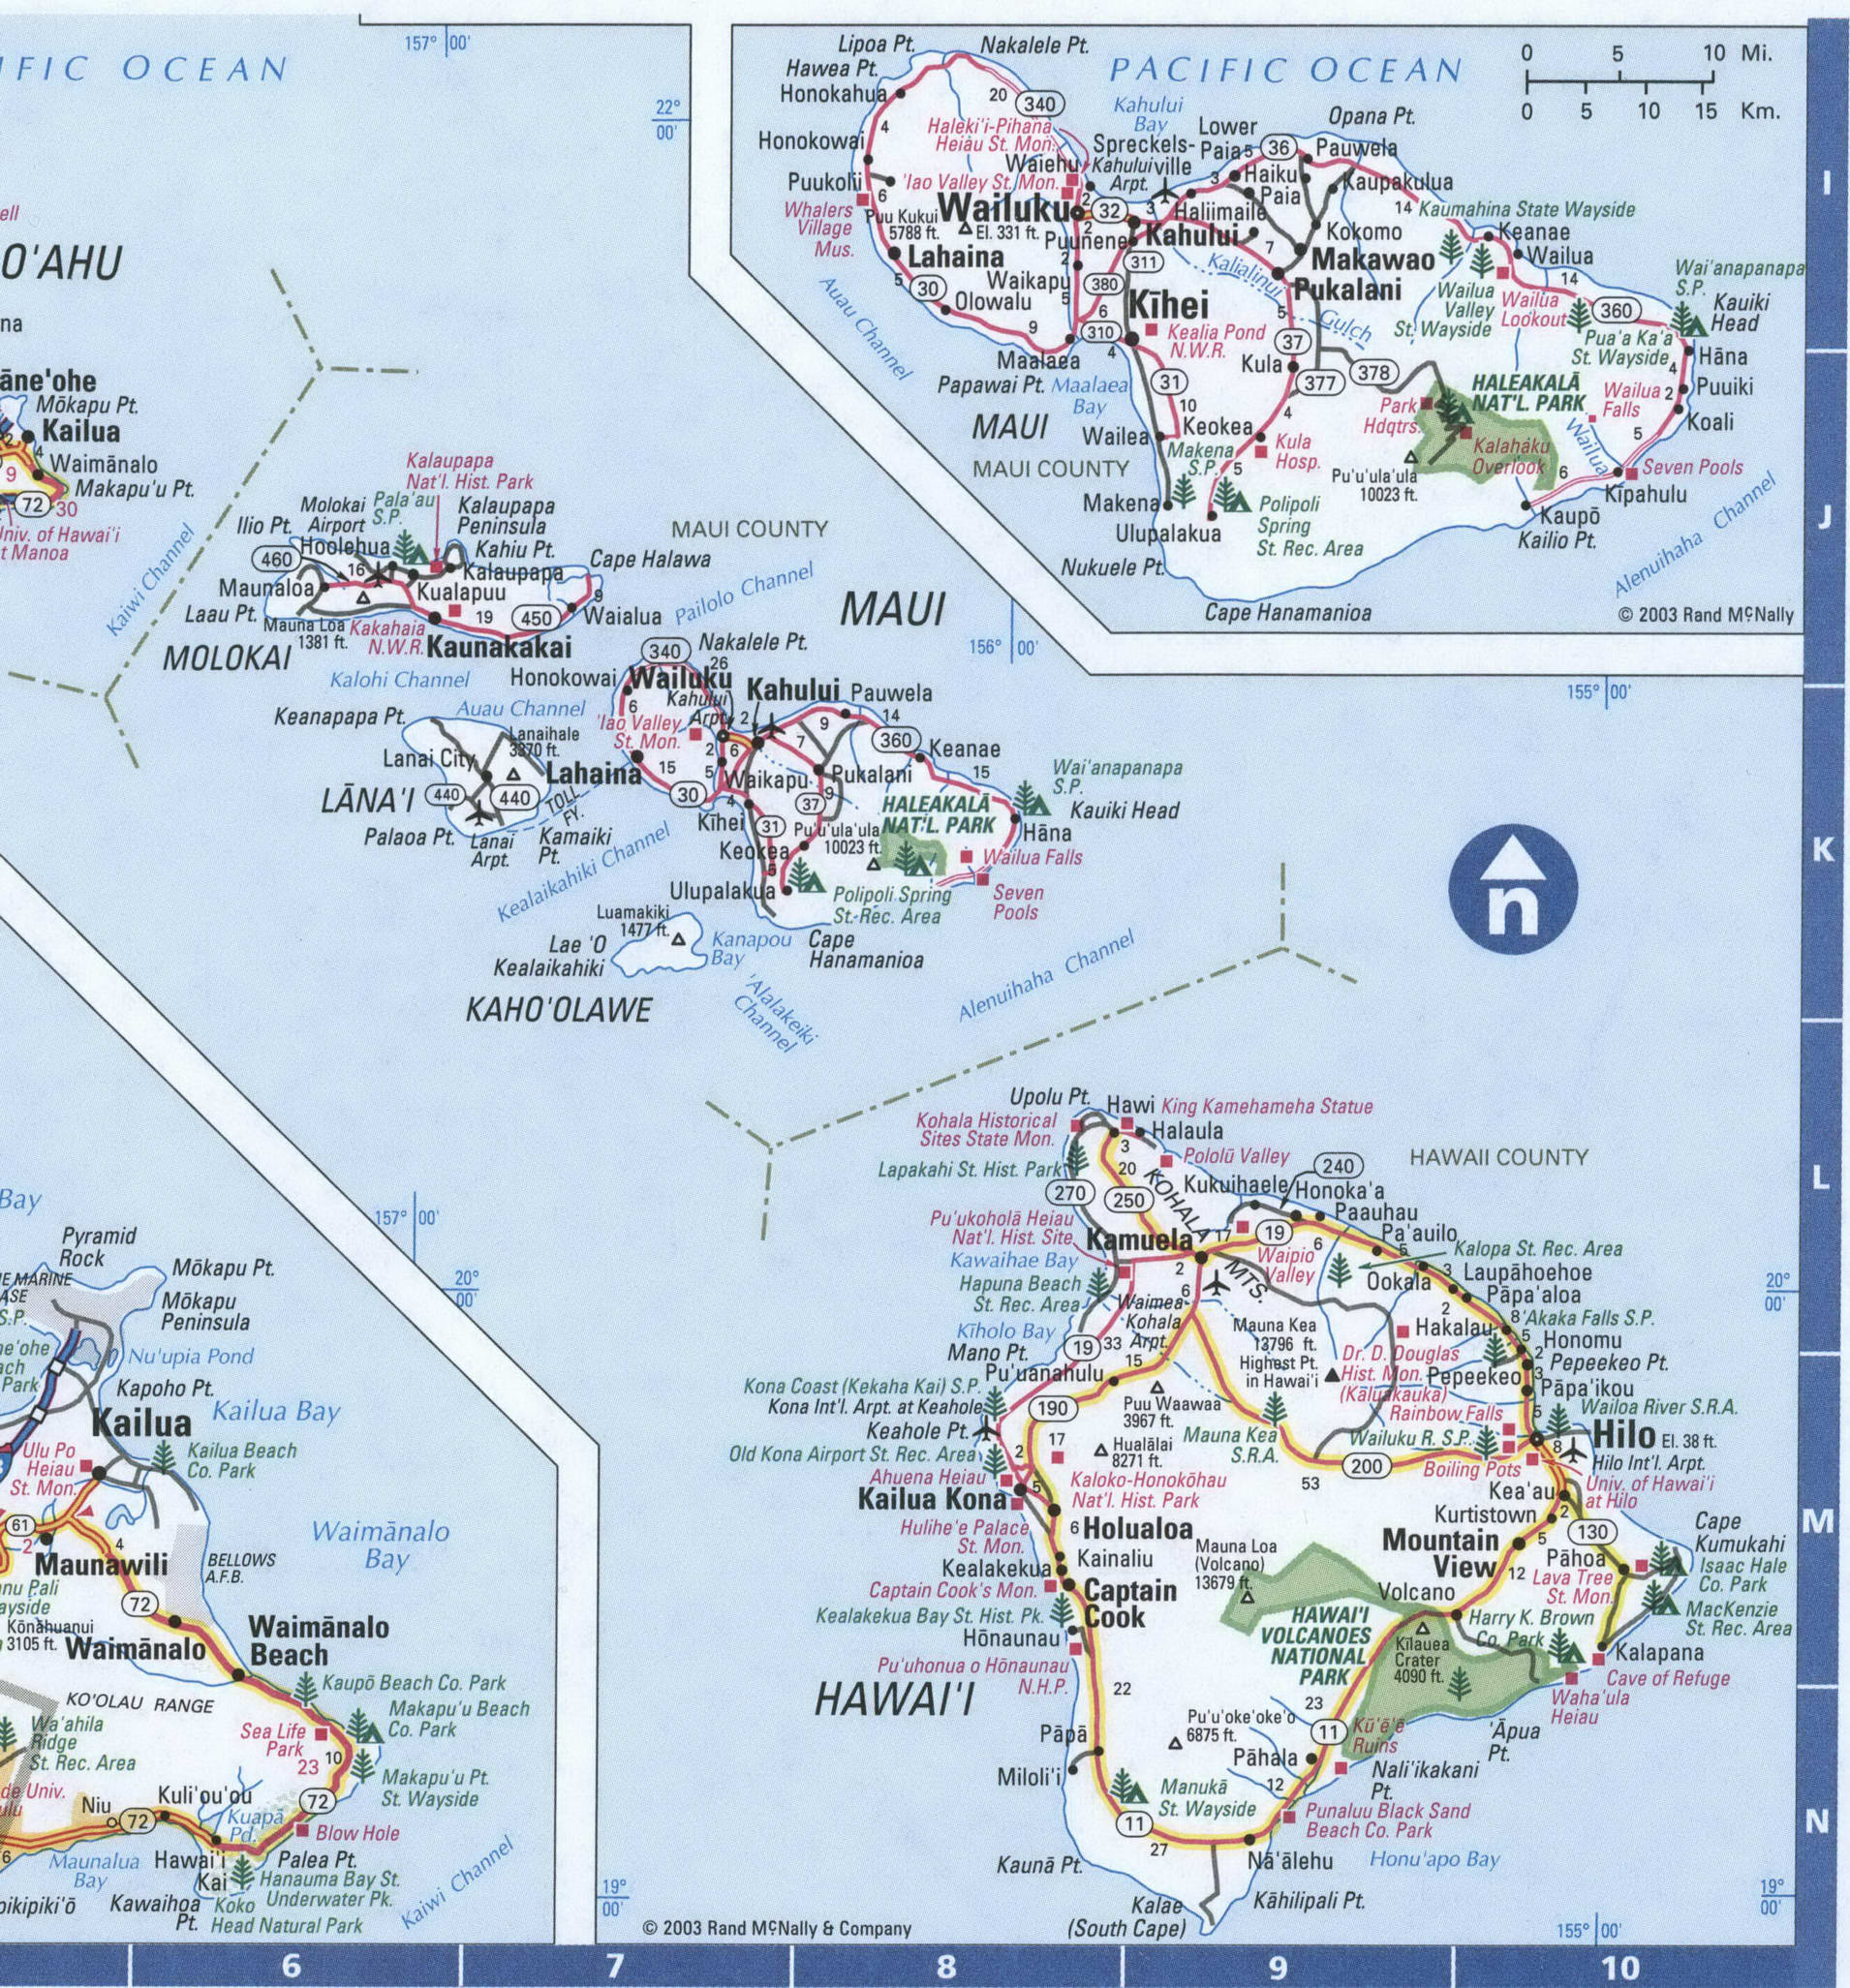 Detailed map of Hawaii